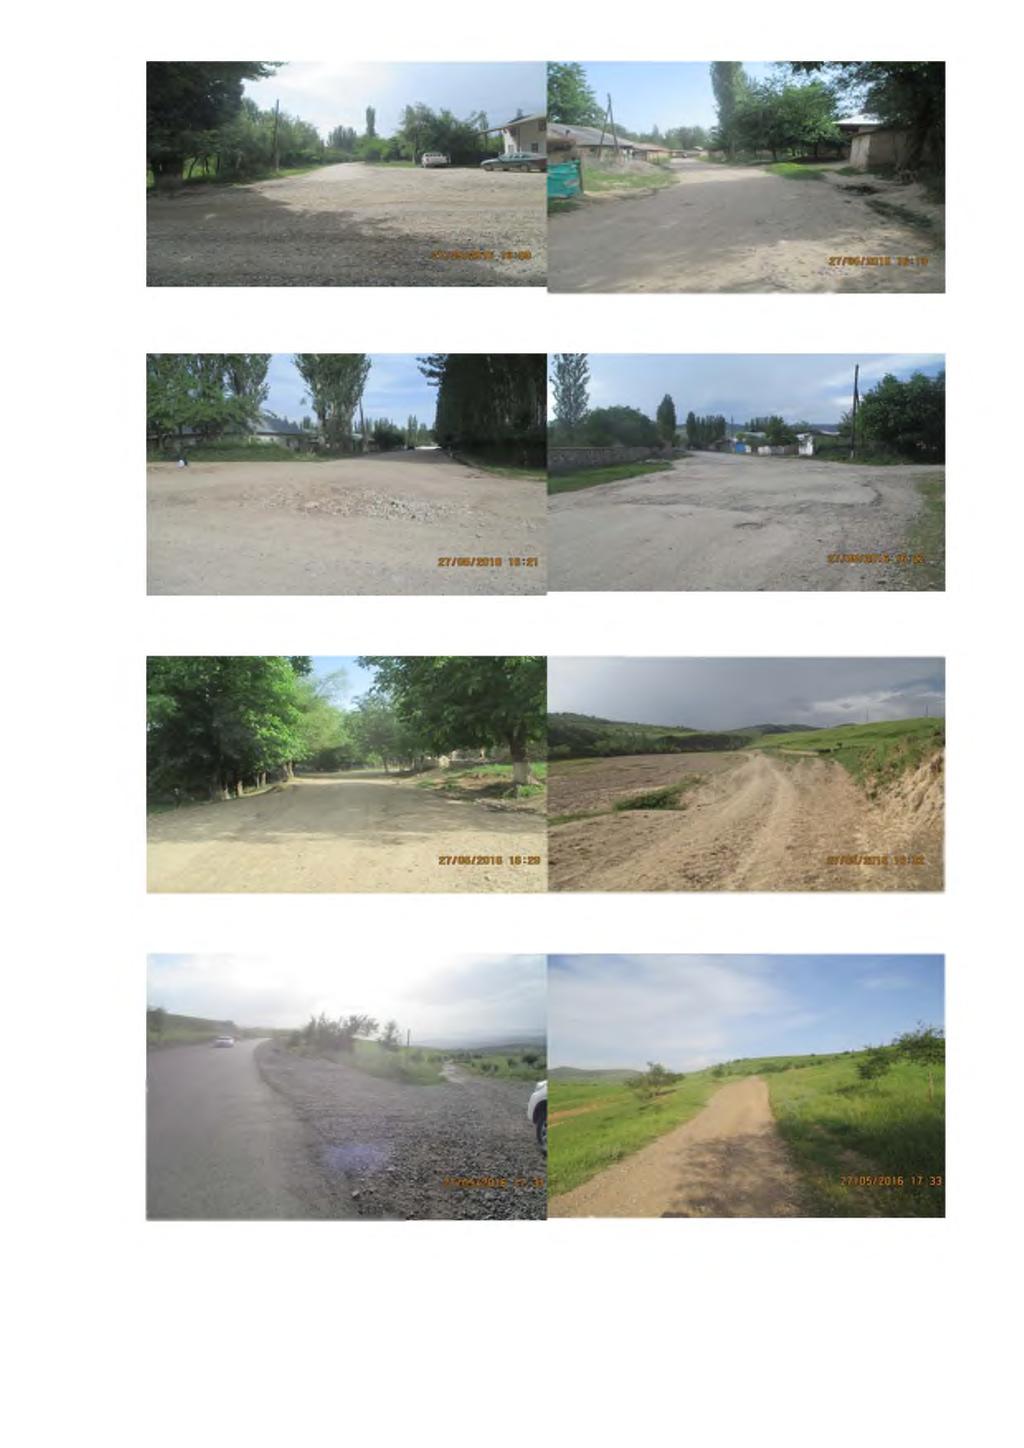 Road to Dorobi village in Khovaling district (connection to